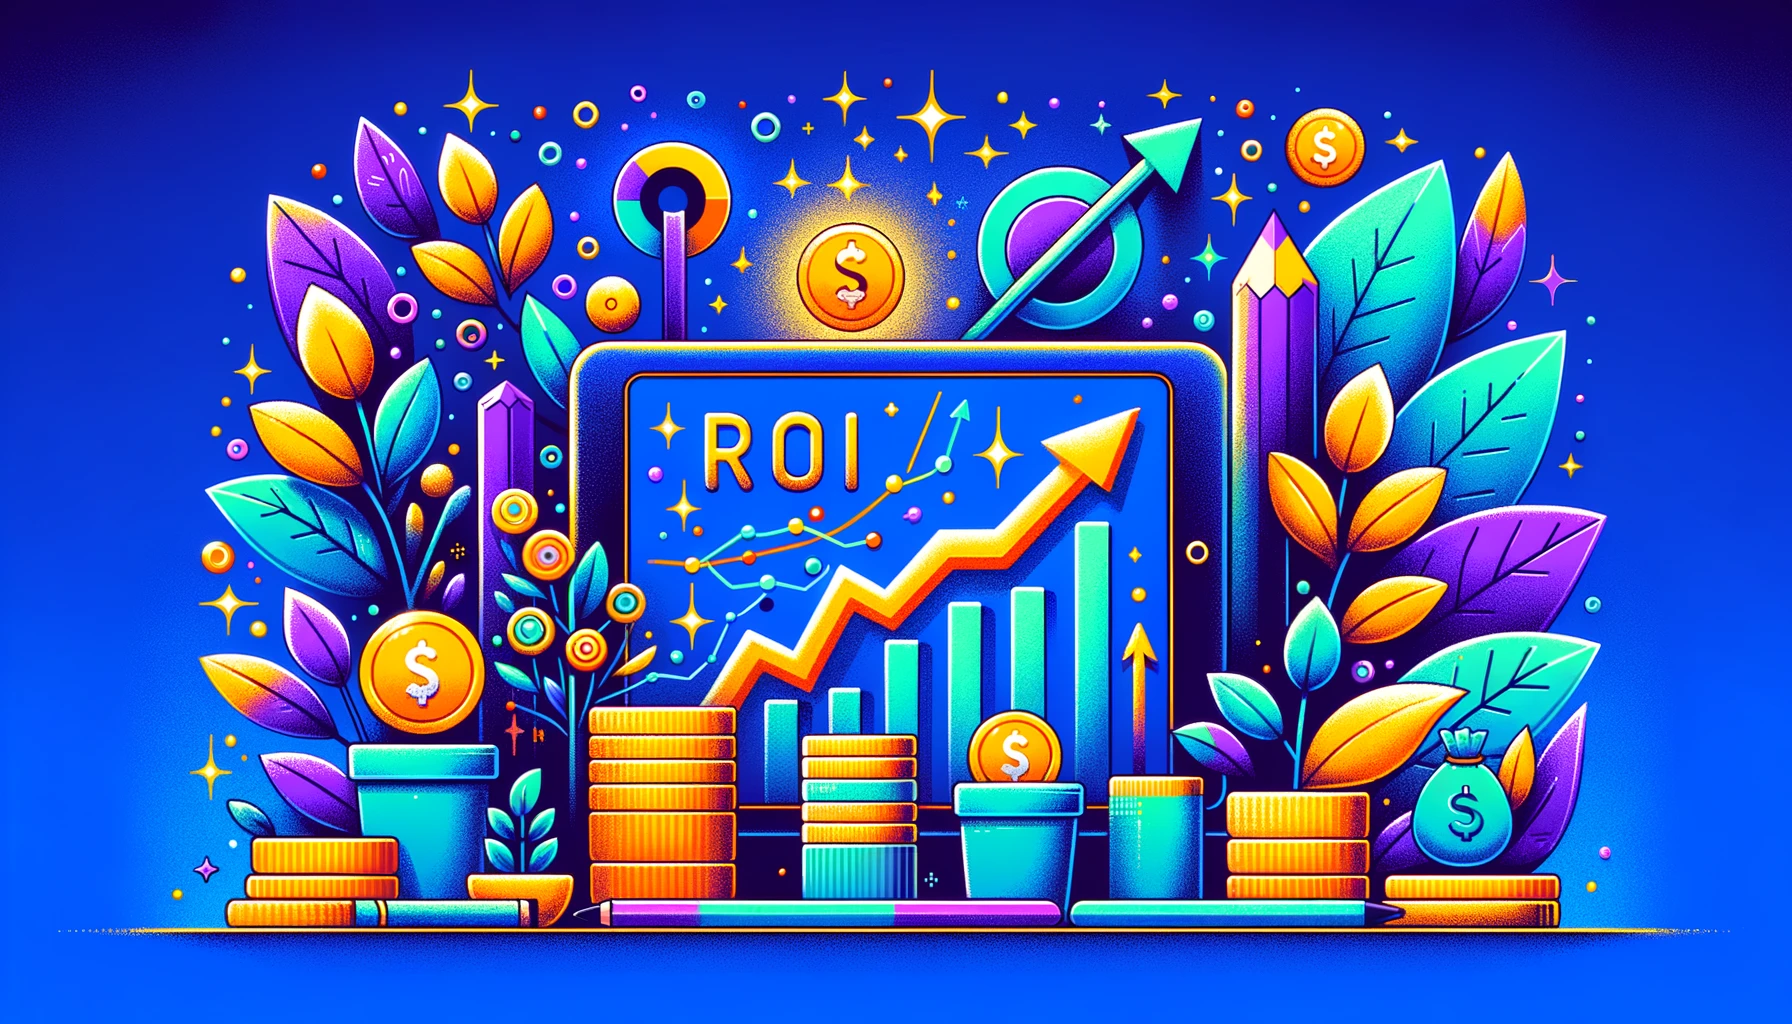 ROI cover - graphs and plants